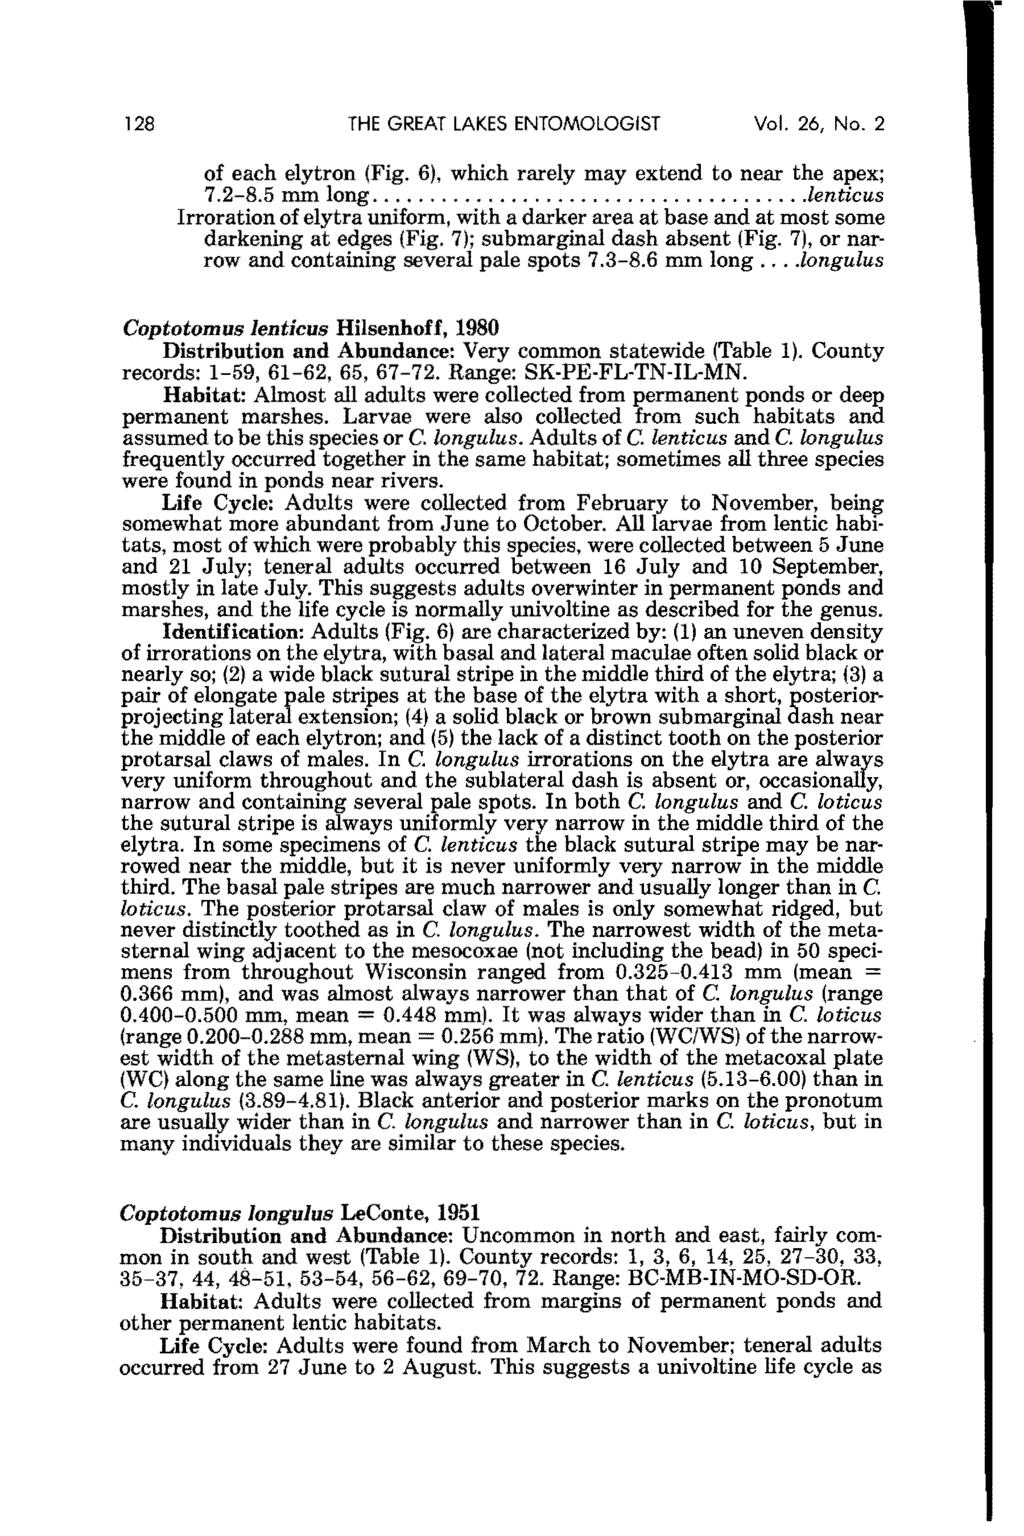 The Great Lakes Entomologist, Vol. 26, No. 2 [1993], Art. 5 128 THE GREAT LAKES ENTOMOLOGIST Vol. 26, No.2 of each elytron (Fig. 6), which rarely may extend to near the apex; 7.2-8.5 mm long...,.lenticus Irroration of elytra uniform, with a darker area at base and at most some darkening at edges (Fig.